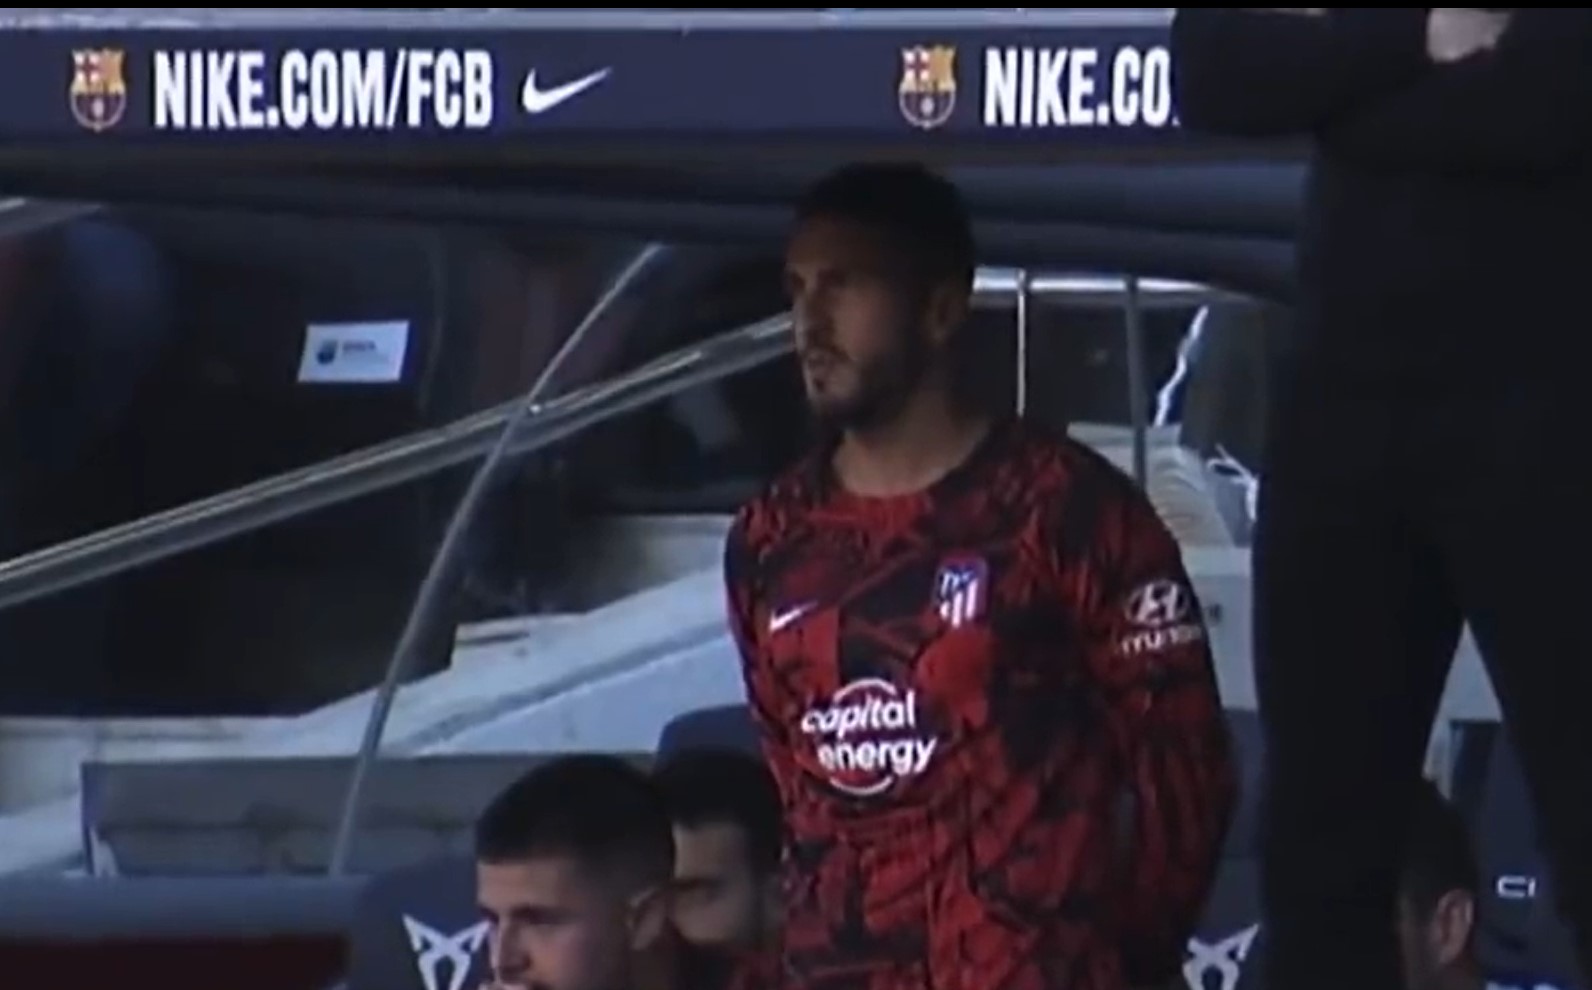 WATCH: Atletico Madrid captain Koke Resurreccion says ‘the referees are bought’ against Barcelona